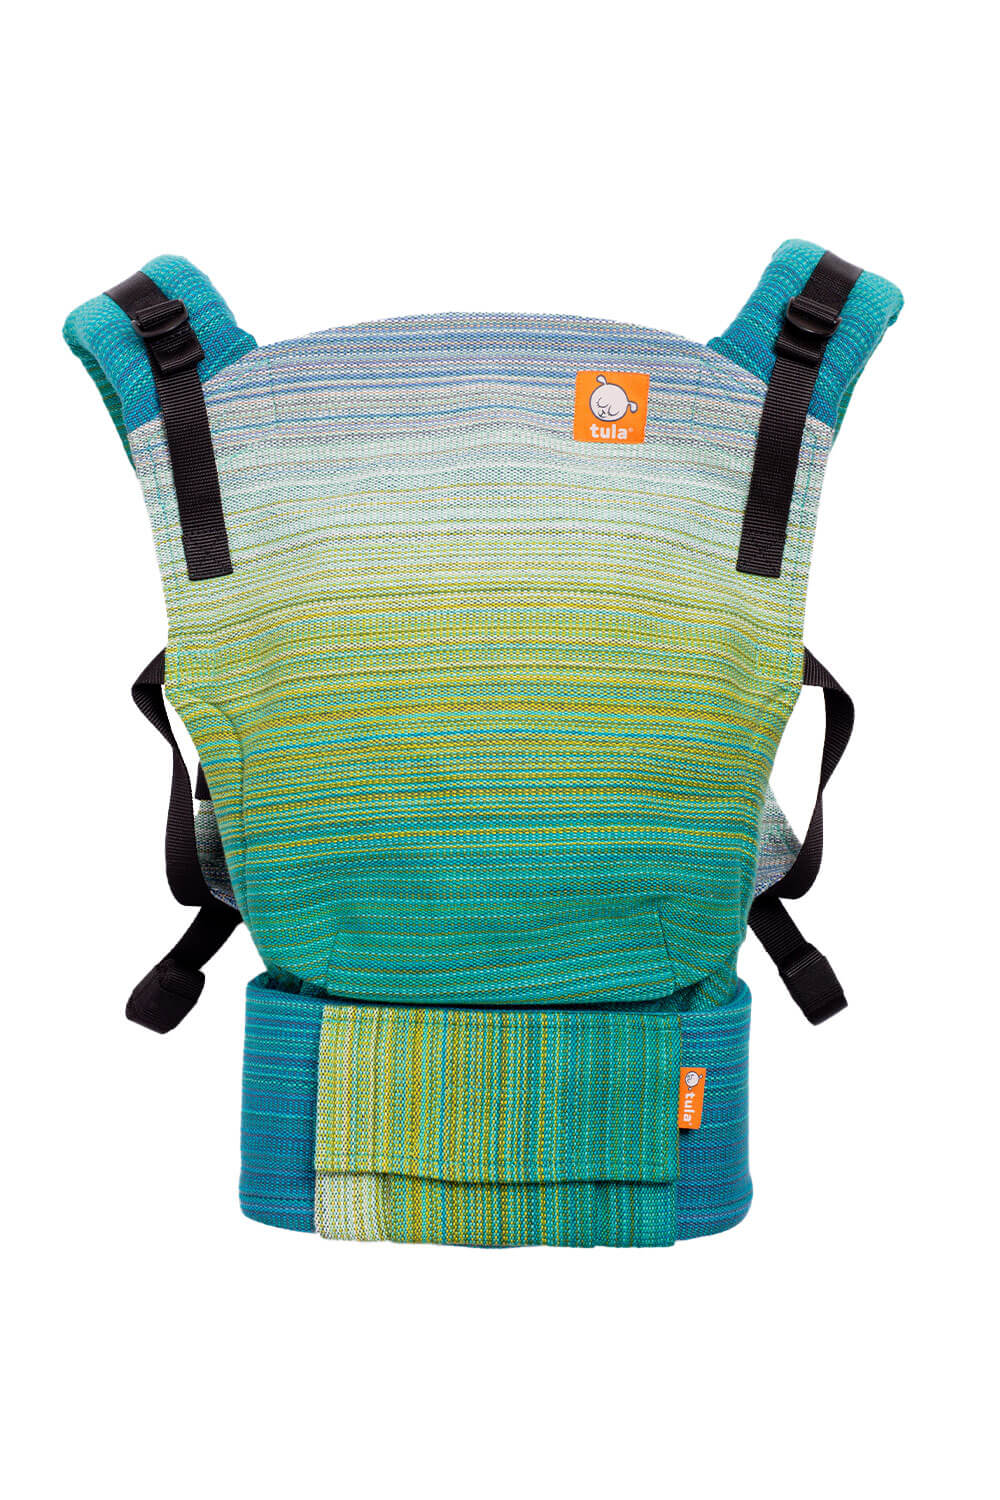 Jasper - Signature Handwoven Free-to-Grow Baby Carrier